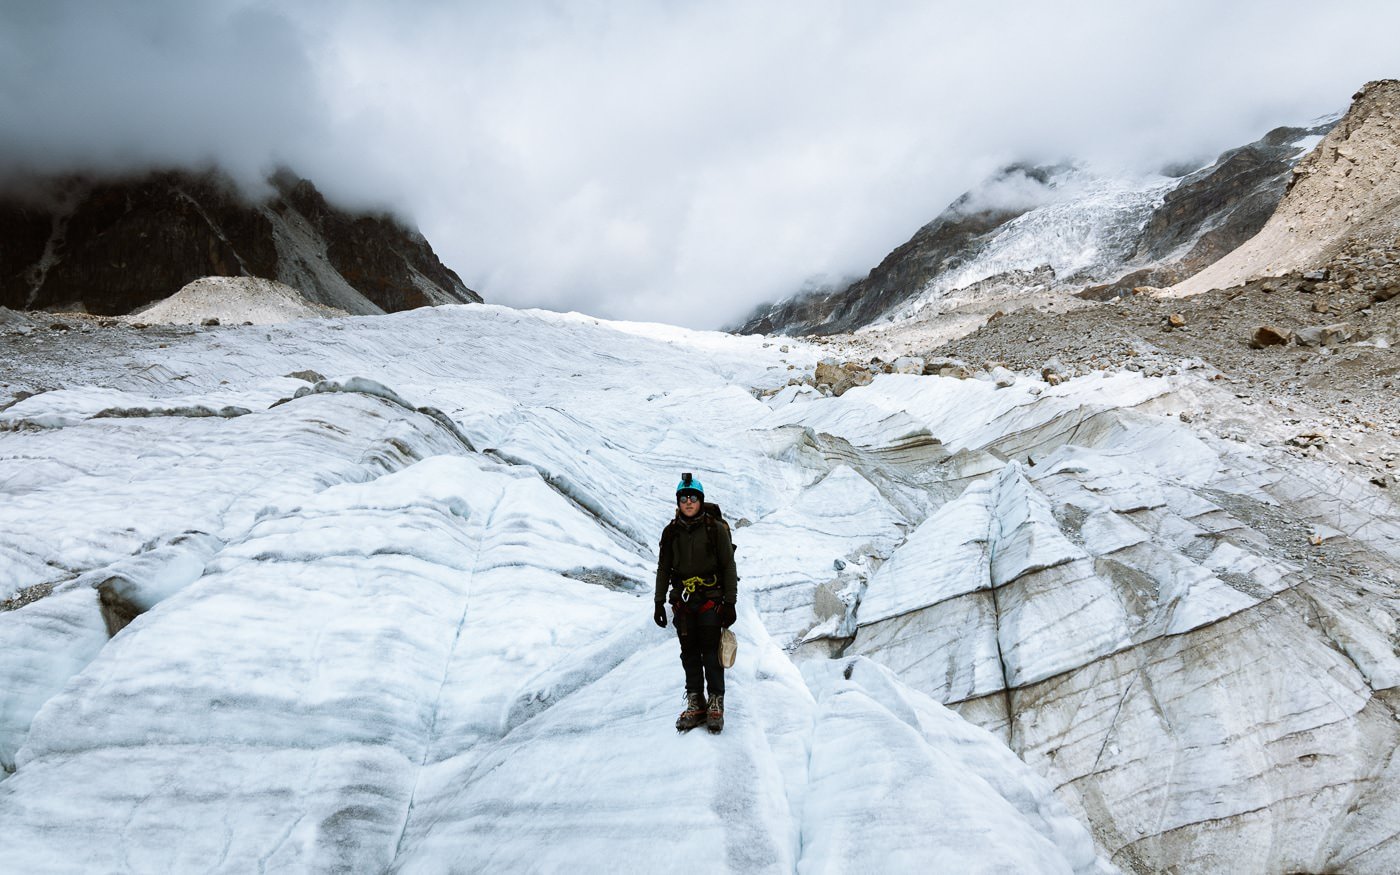 Olly Gaspar on a Glacier training for at Basic Mountaineering Course at Himalayan Mountaineering Institute, HMI Darjeeling